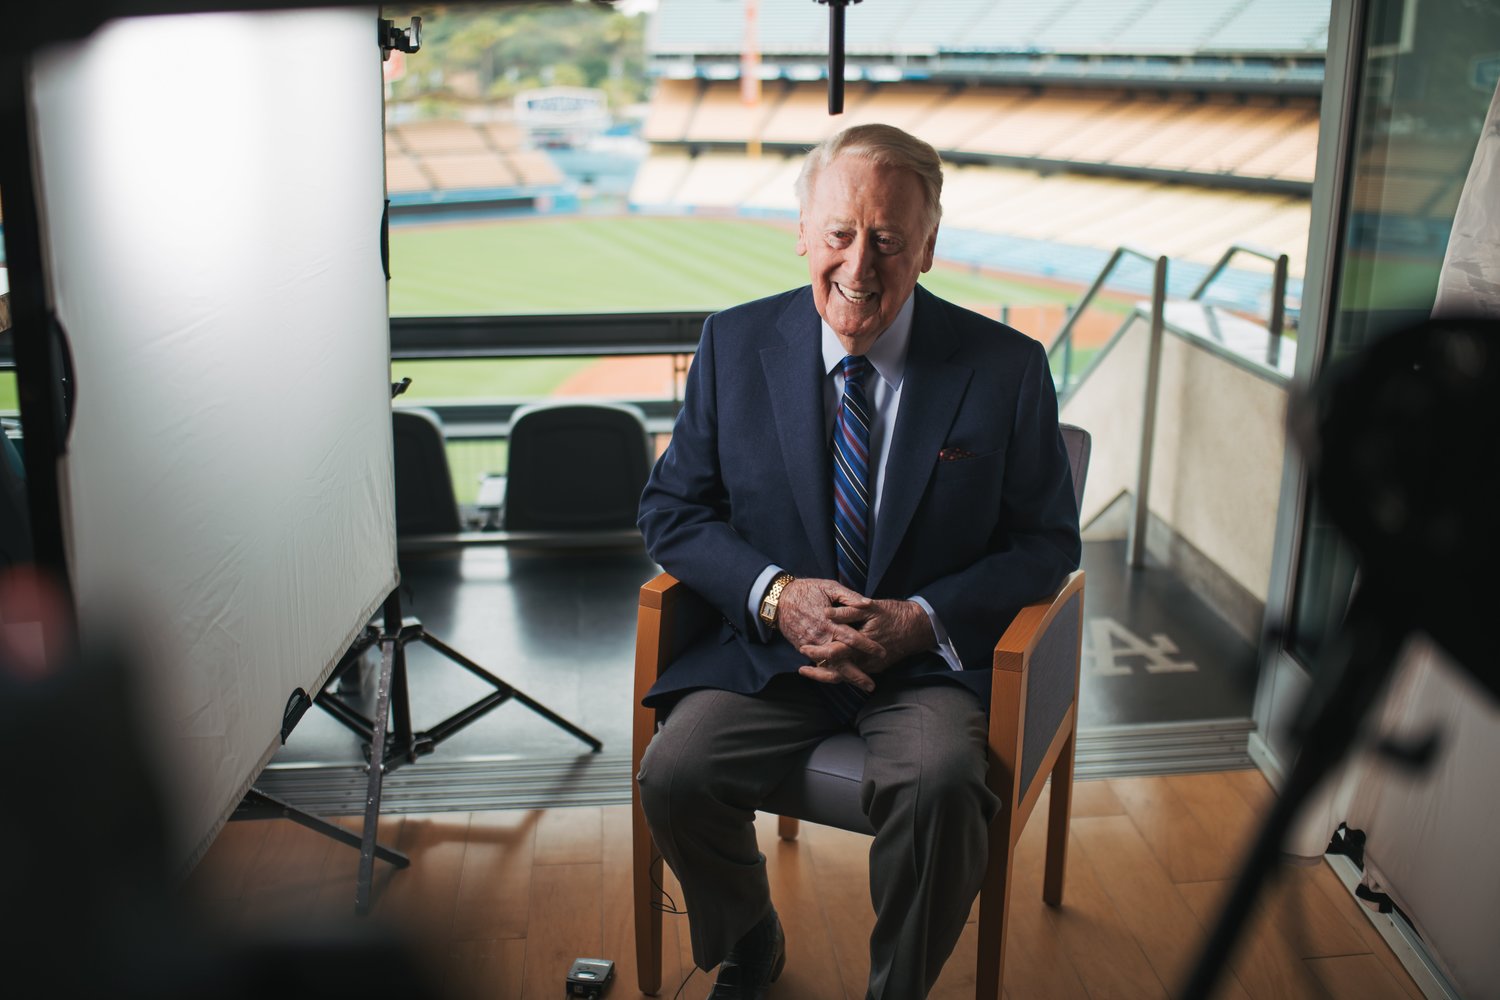 Vin Scully is seen during a 2019 interview for the baseball documentary "Soul of a Champion: The Gil Hodges Story," produced by Spirit Juice Studios in association with Catholic Athletes for Christ. Scully -- who died Aug. 2, 2022, at the age of 94 -- had received the Gabriel Personal Achievement Award from the Catholic Academy of Communication Professionals at the Catholic Media Conference in St. Louis June 2, 2016.